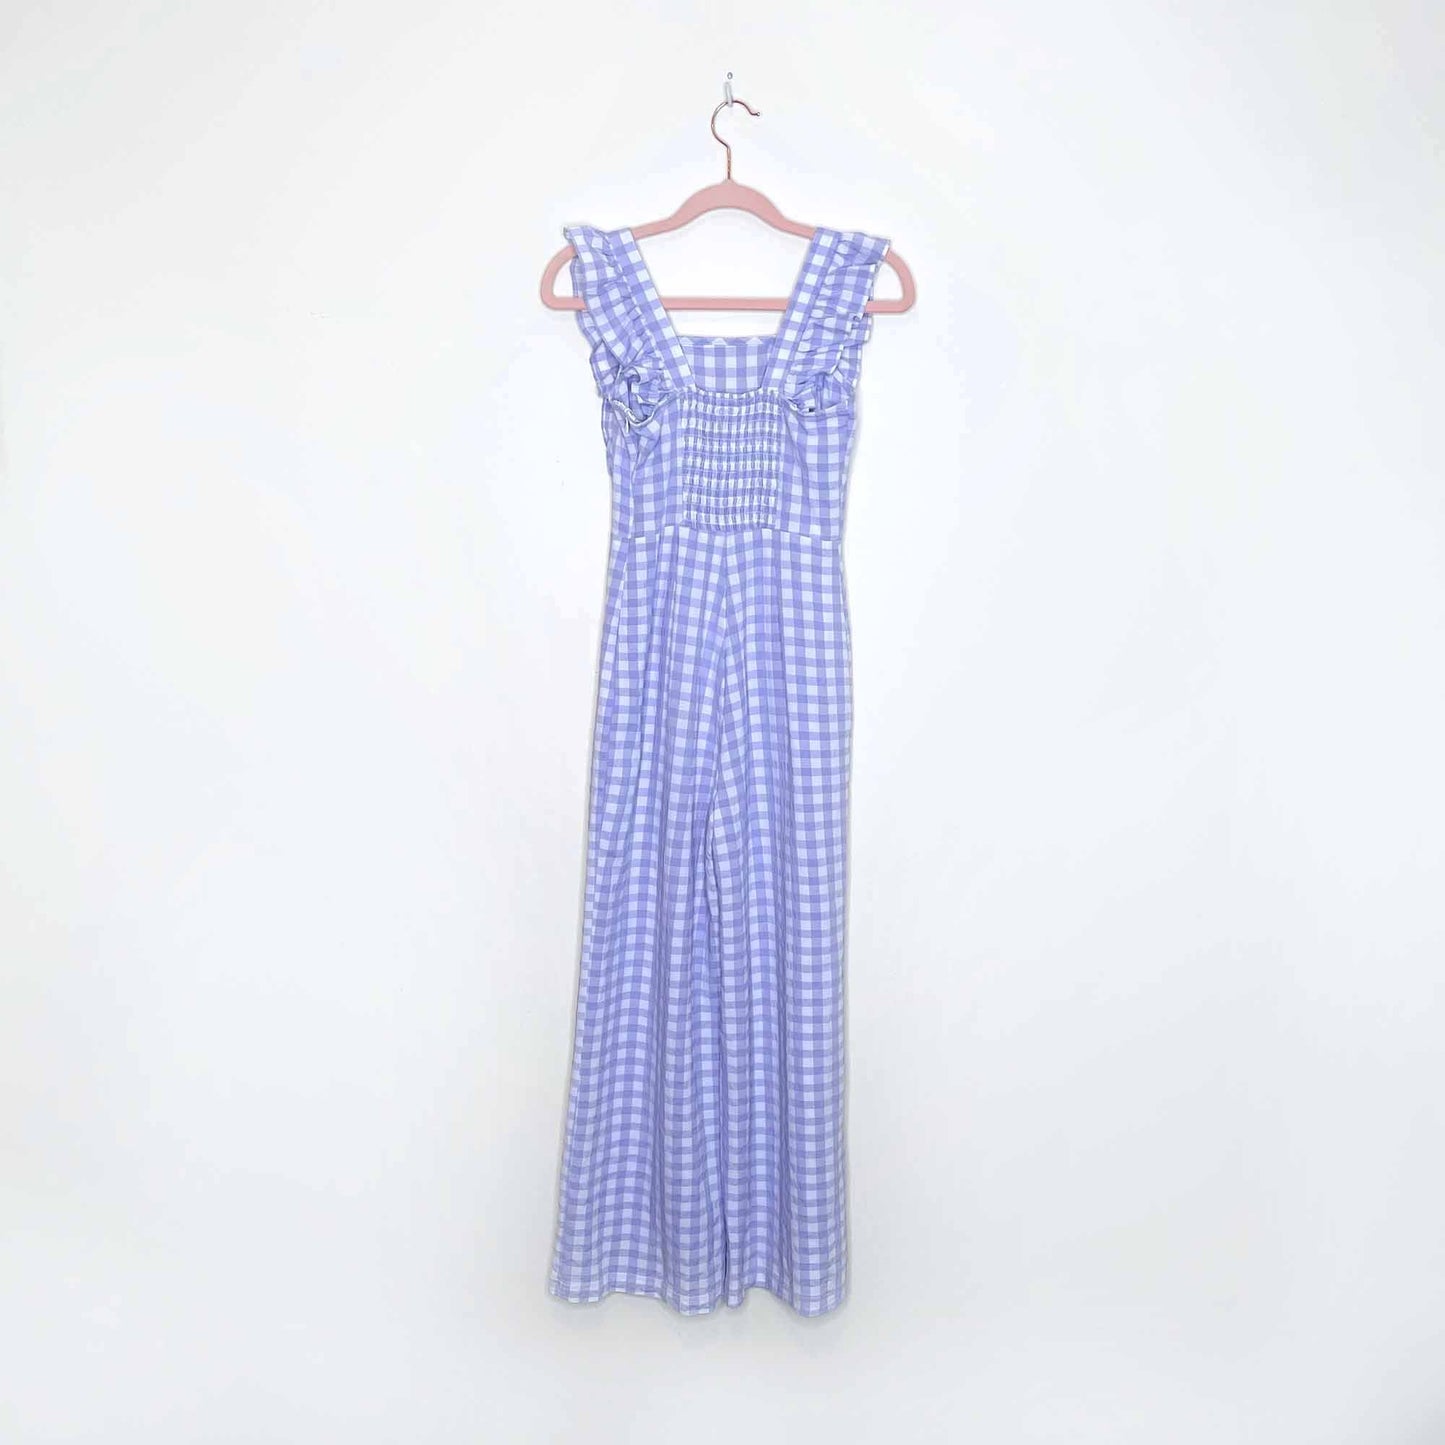 uo urban outfitters emerson purple gingham ruffled jumpsuit - size xs